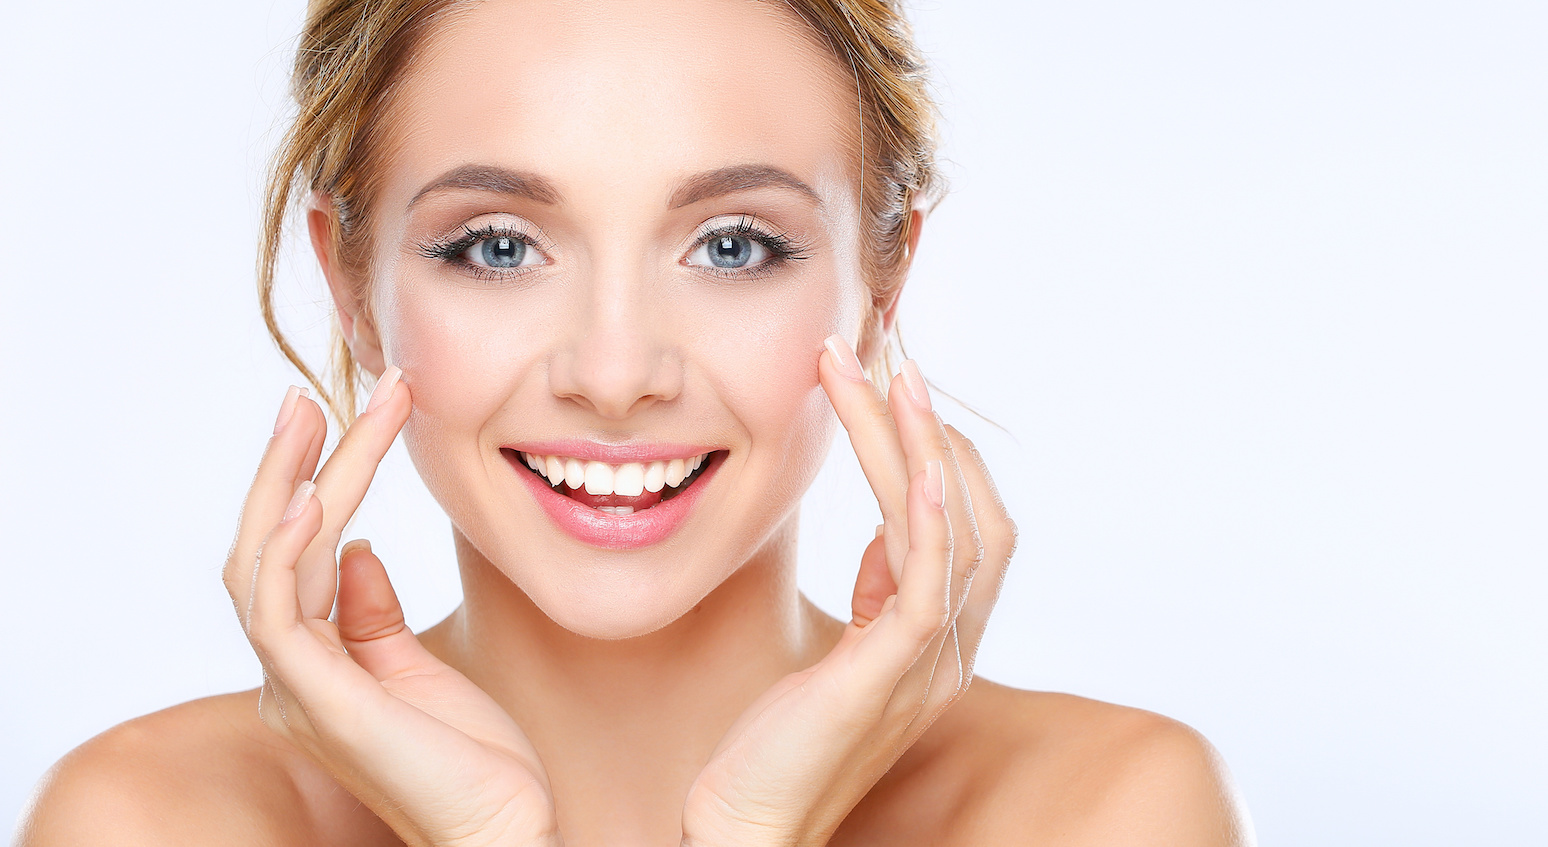 10 Important Things to Learn about Facial Implants before Surgery